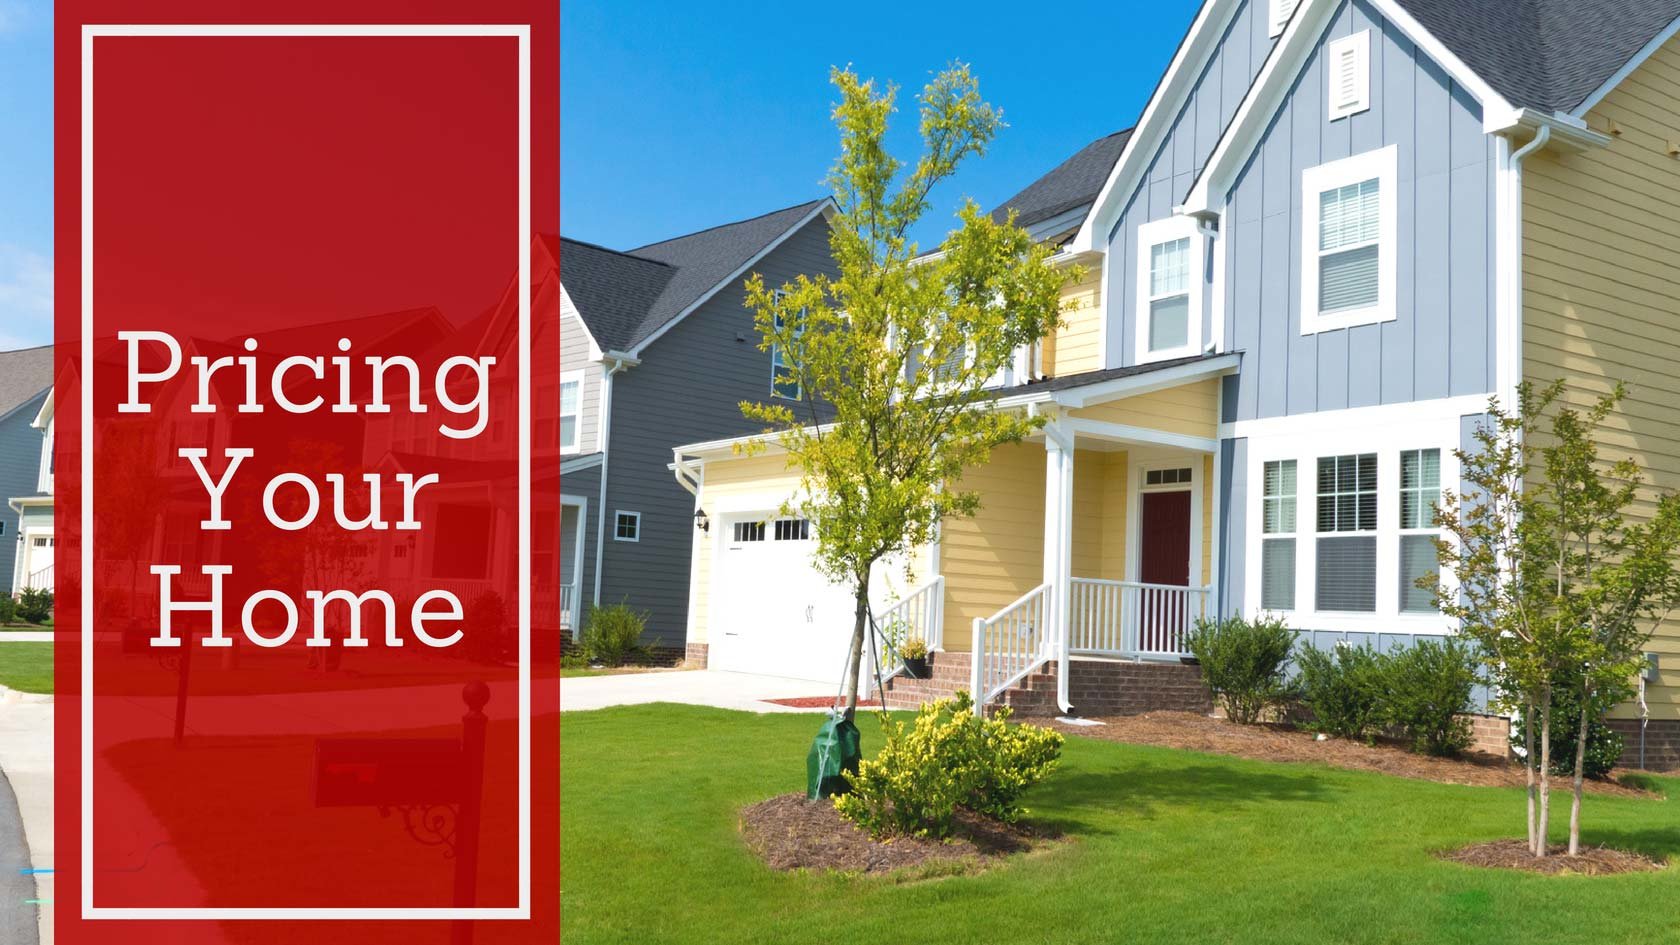 Pricing Your Home Competitively